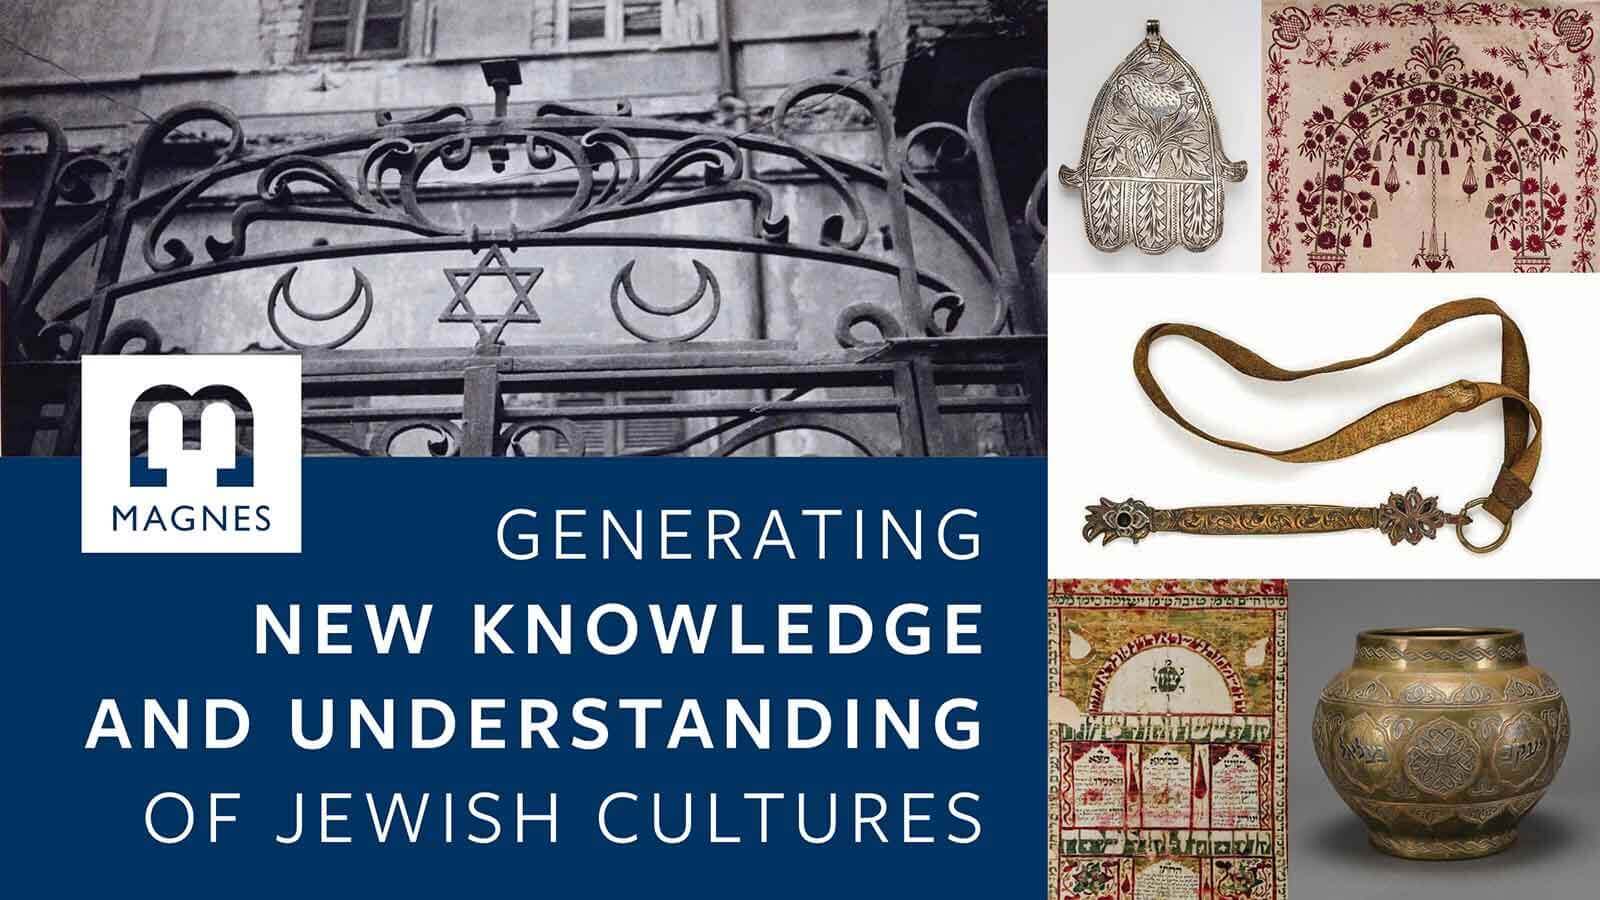 Images of a gate, hamsa almlet, rug, Torah pointer, manuscript, and vase with title text